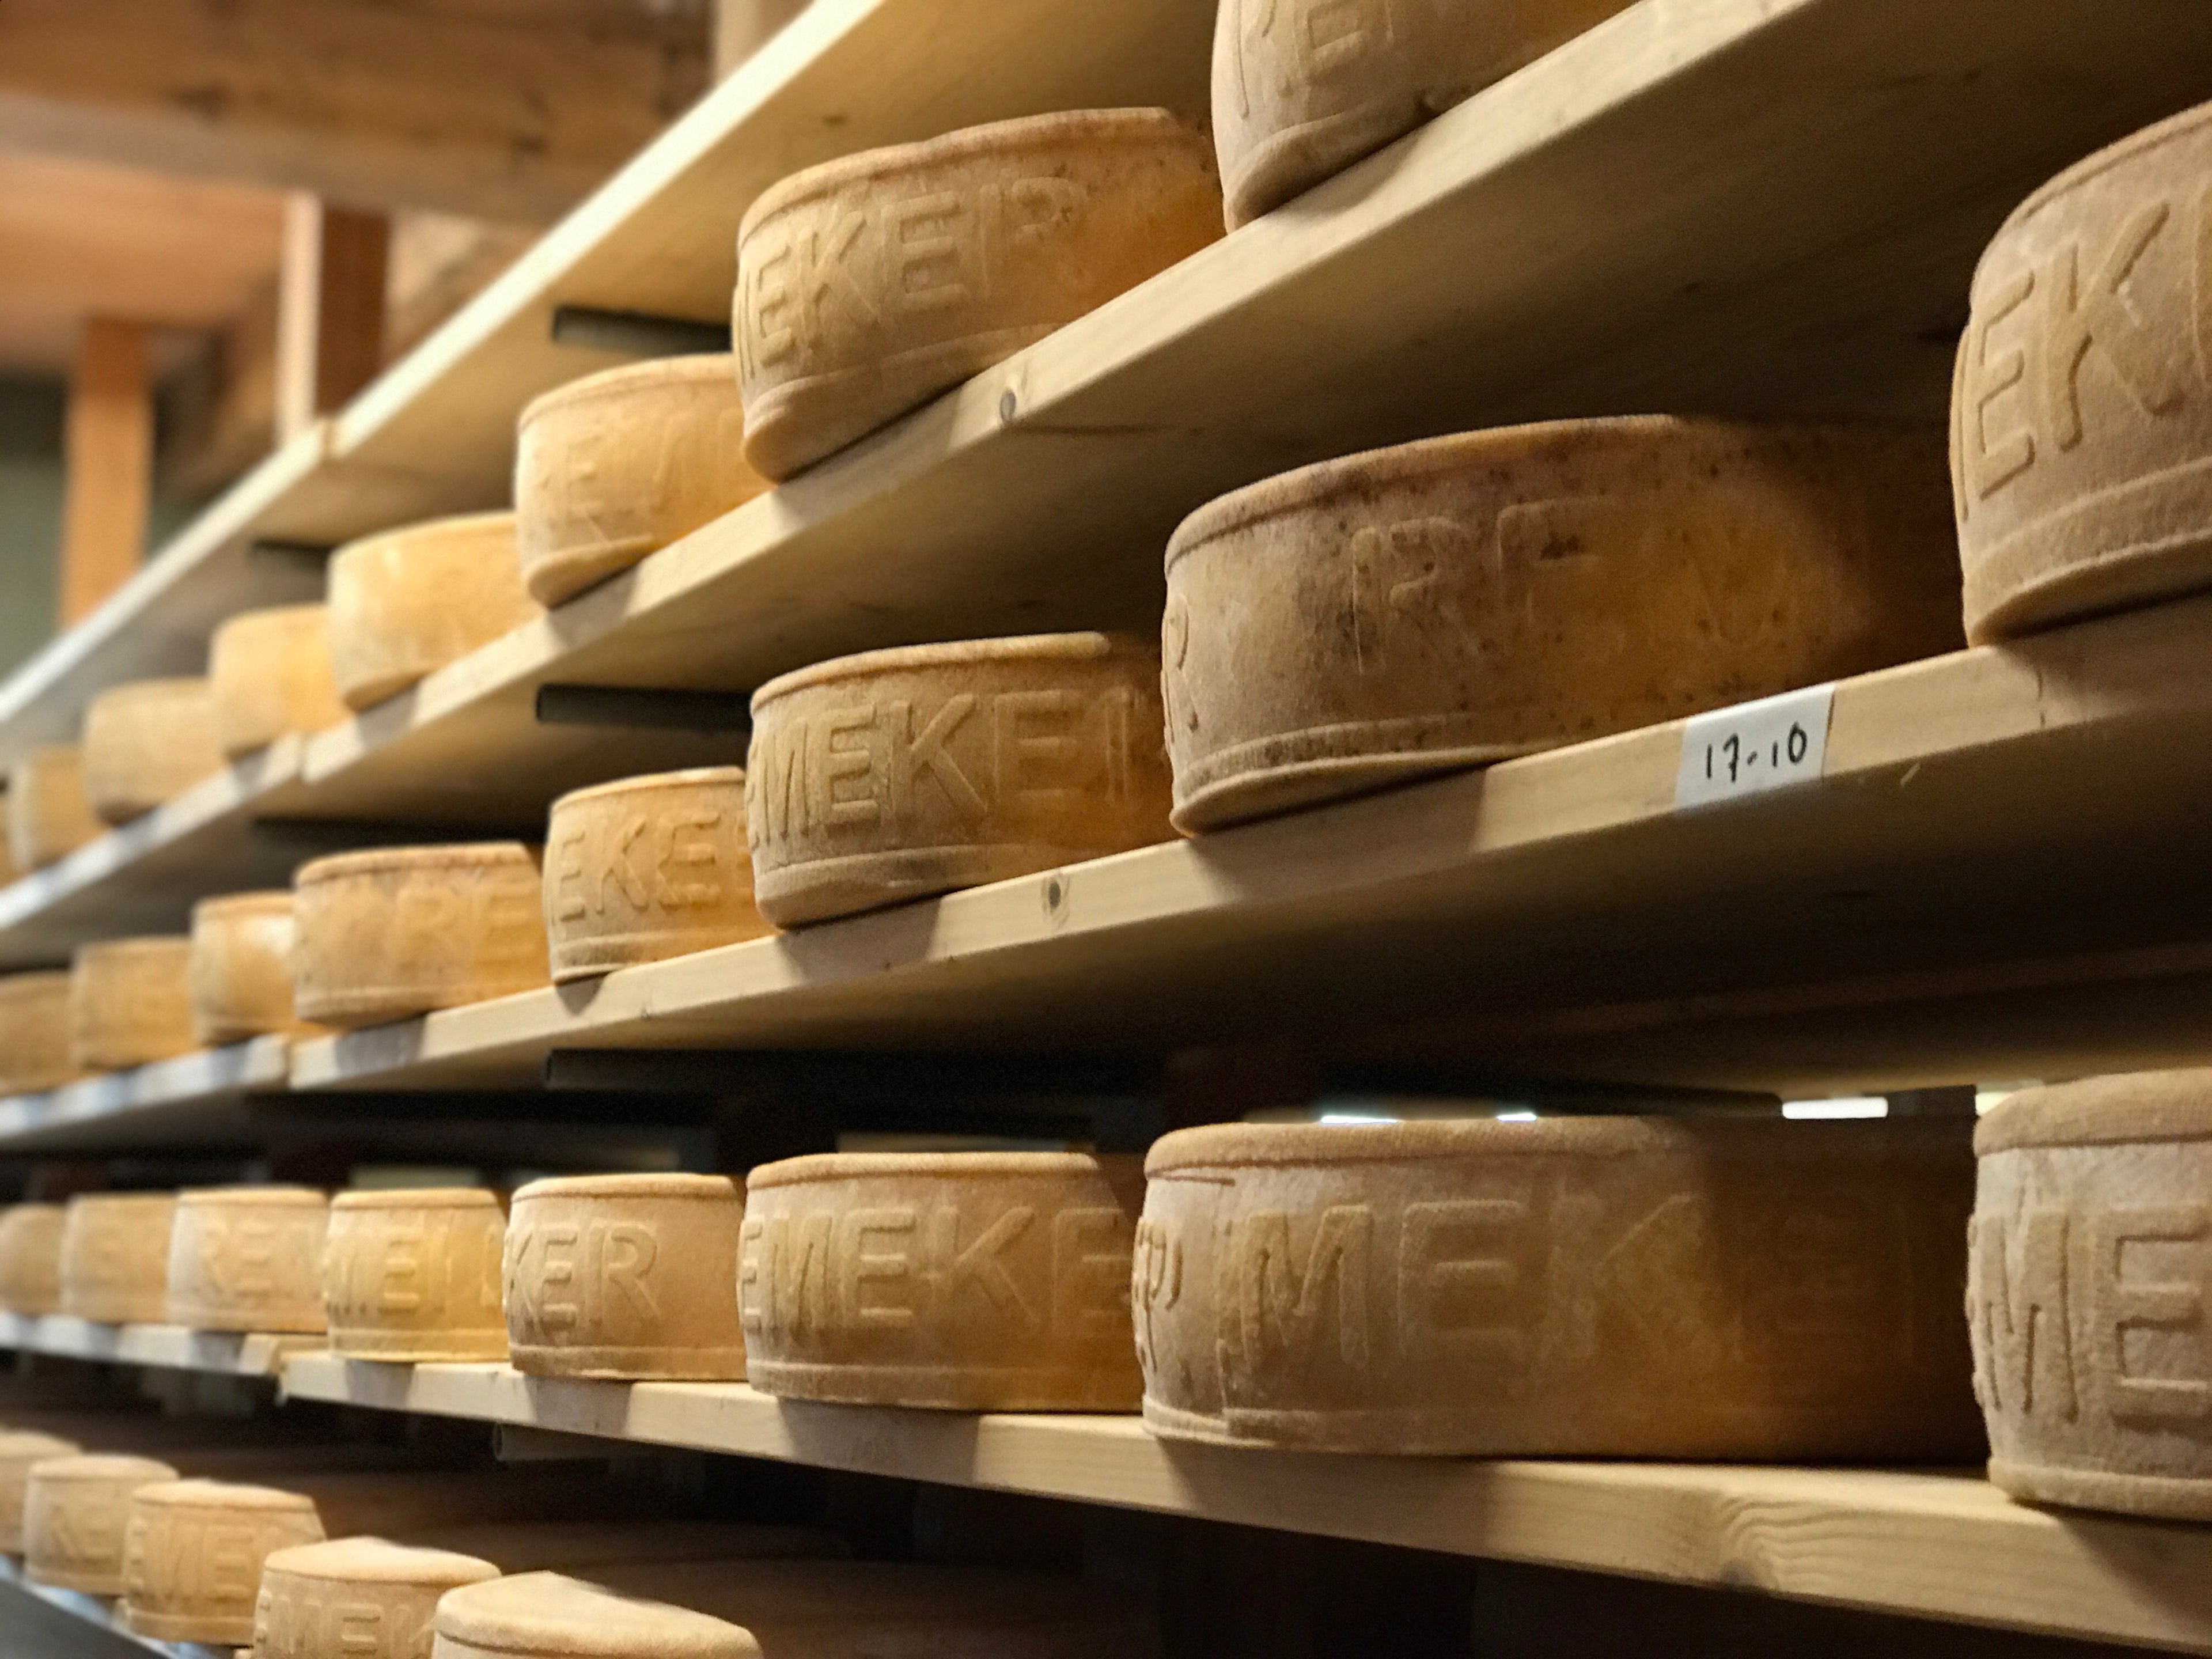 7 Tips for Storing Cheese Properly